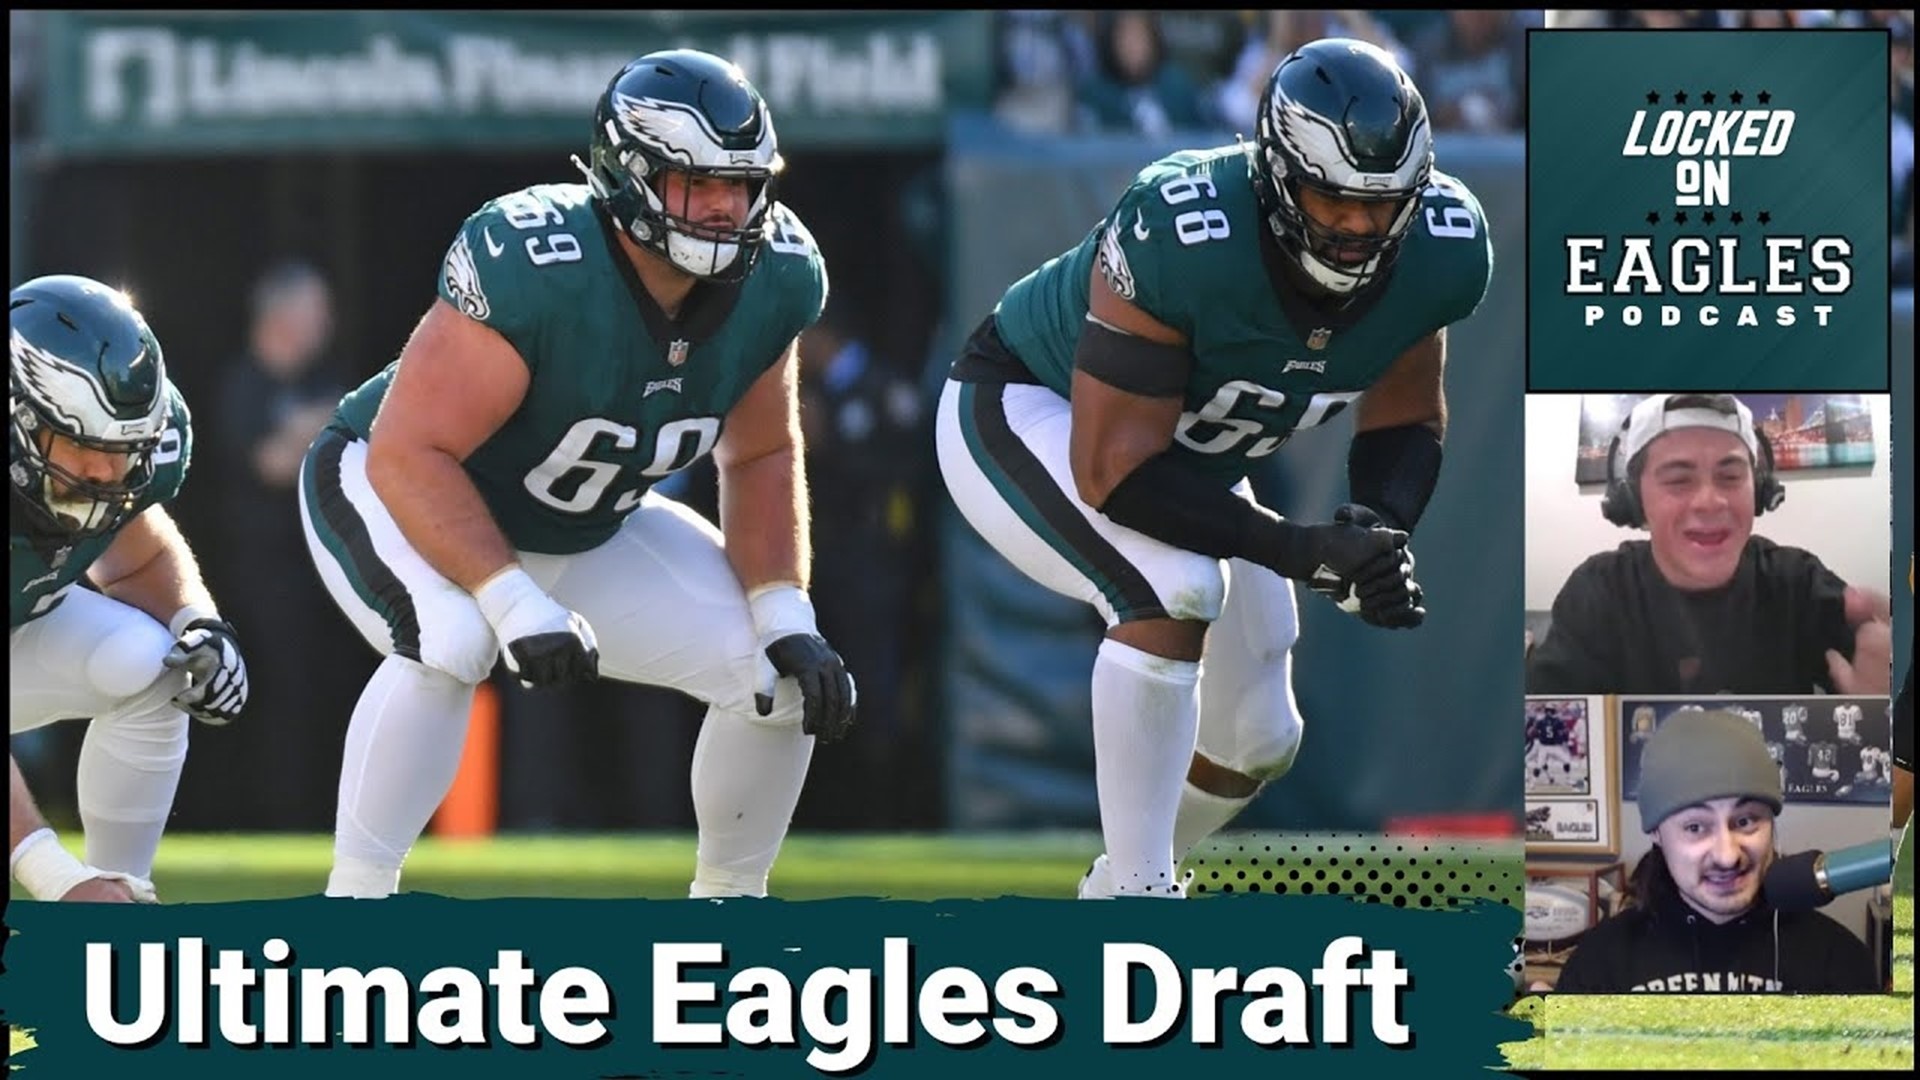 Discussing what Eagles players the team cannot live without in 2023 (Jason Kelce, Lane Johnson, Fletcher Cox, etc.)